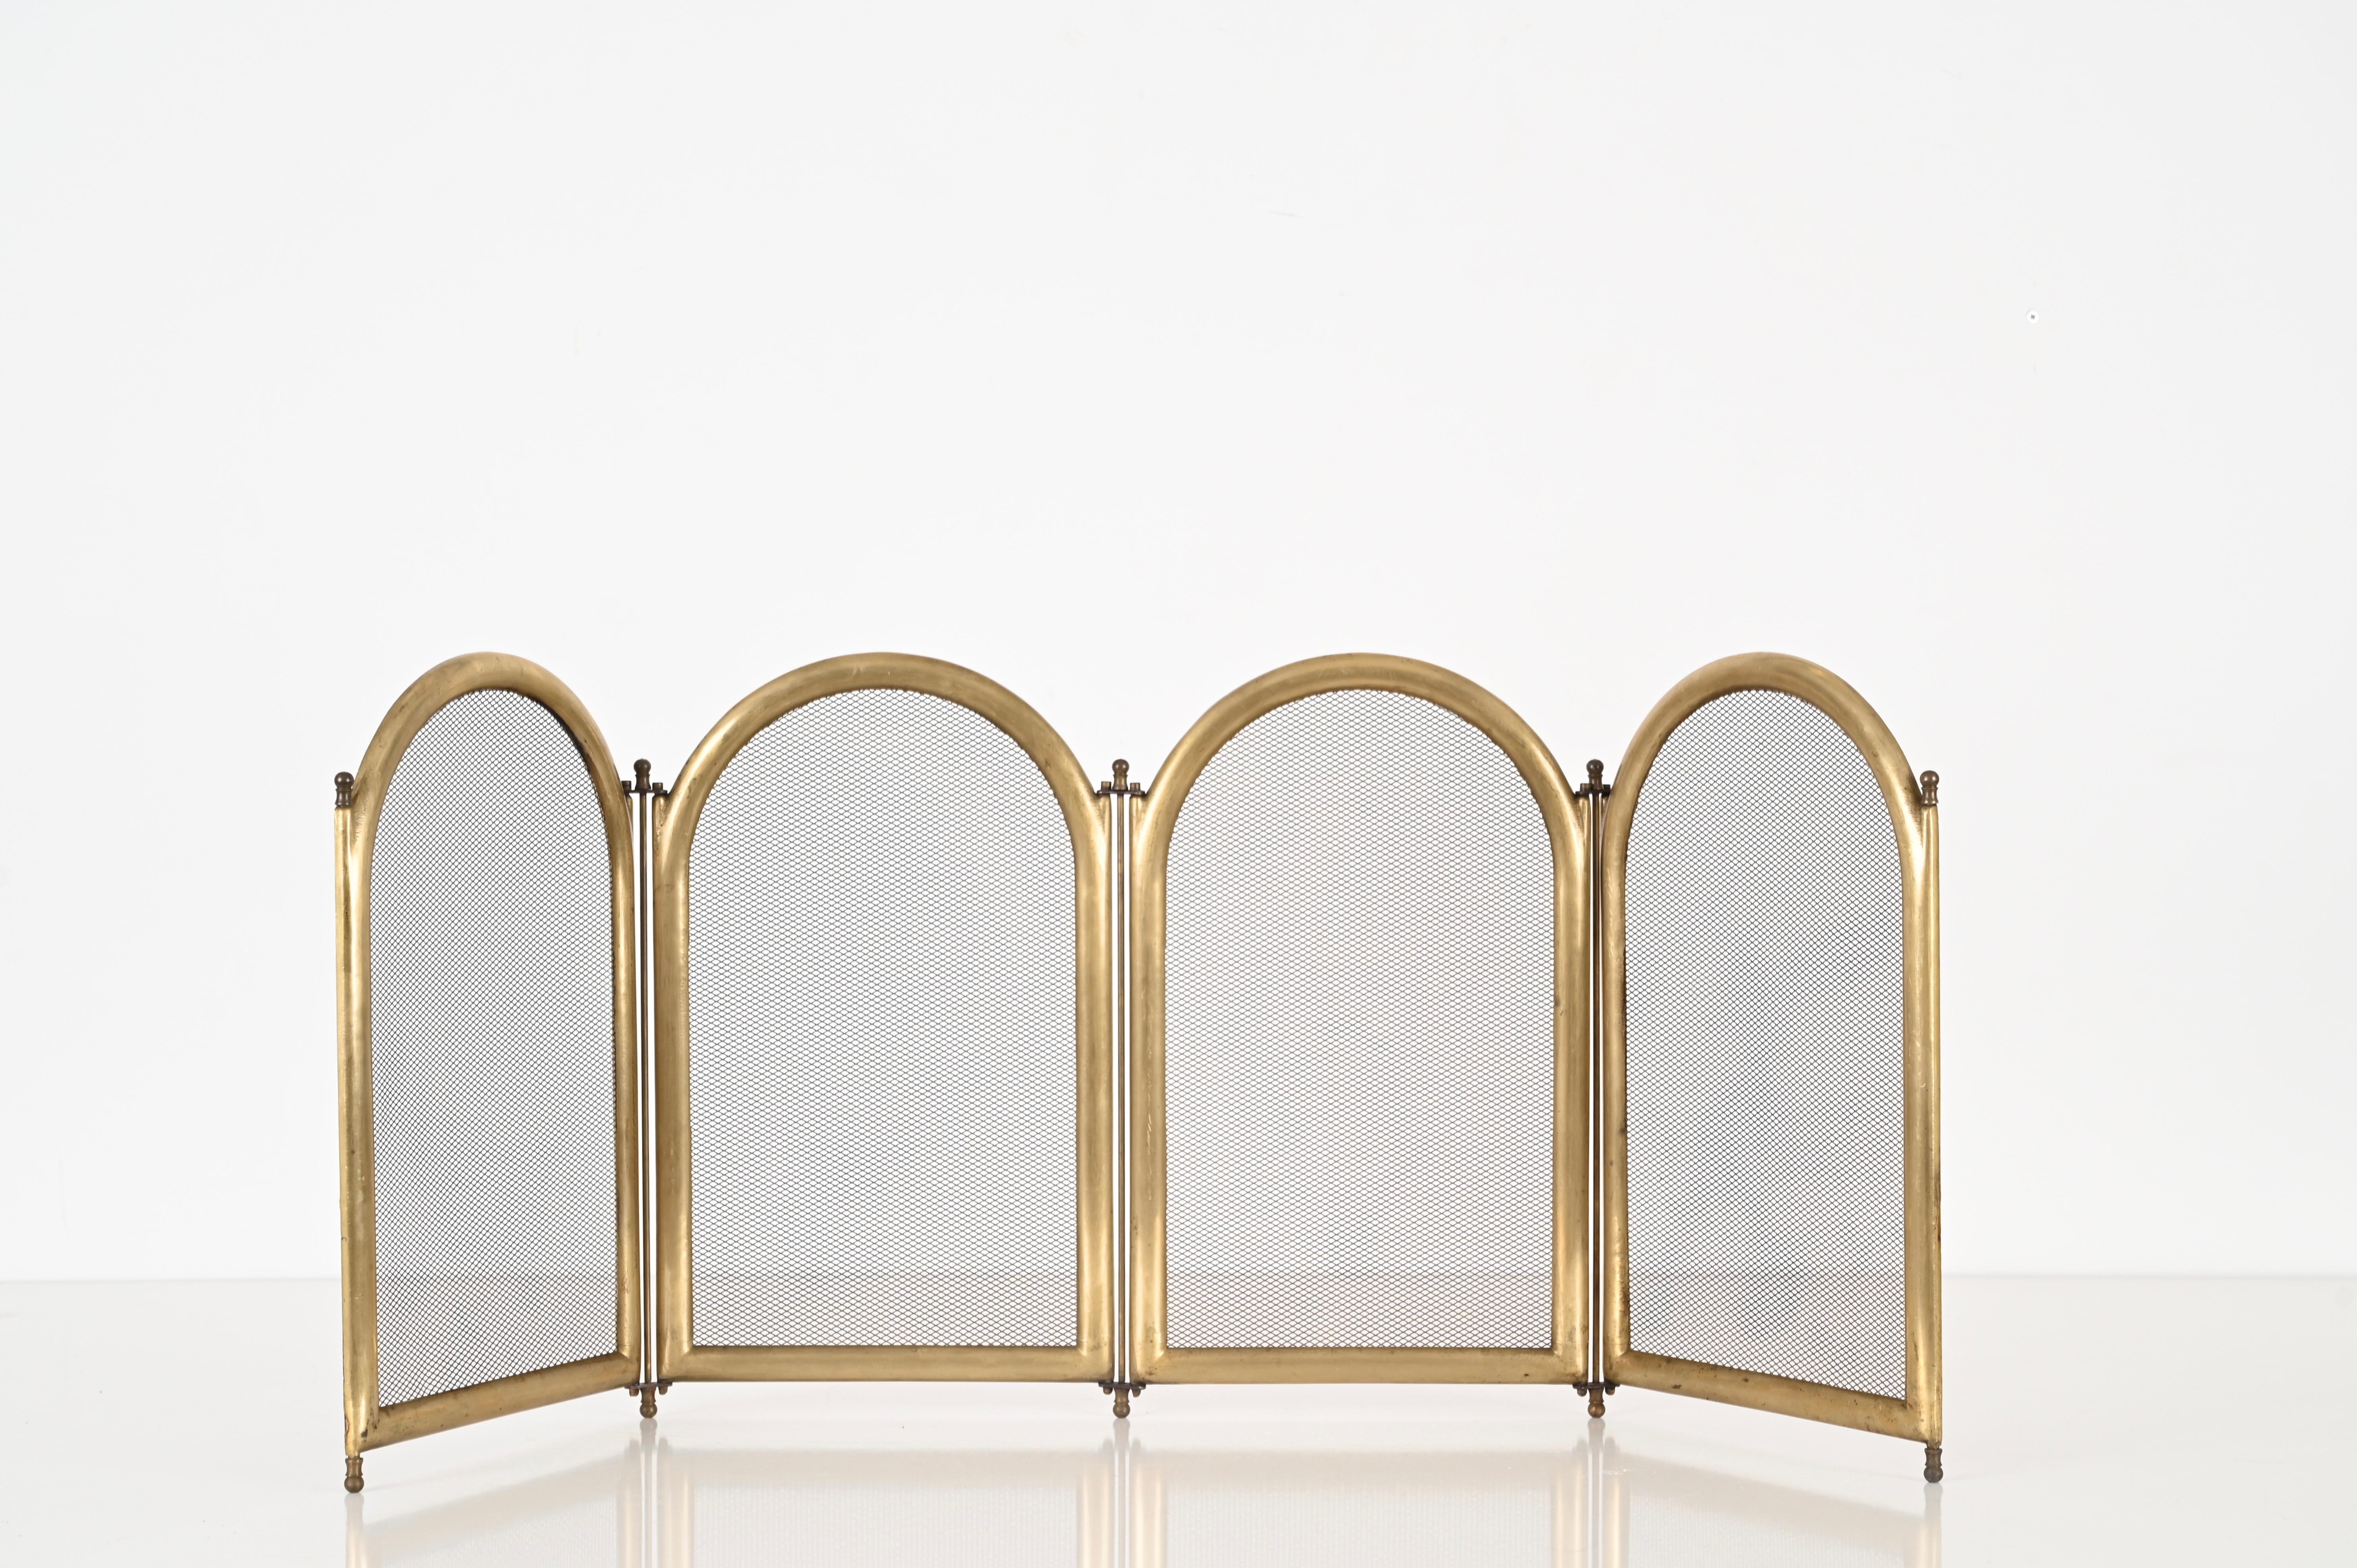 20th Century Italian Solid Brass Folding Fireplace Screen or Fire Guard, Italy 1960s For Sale